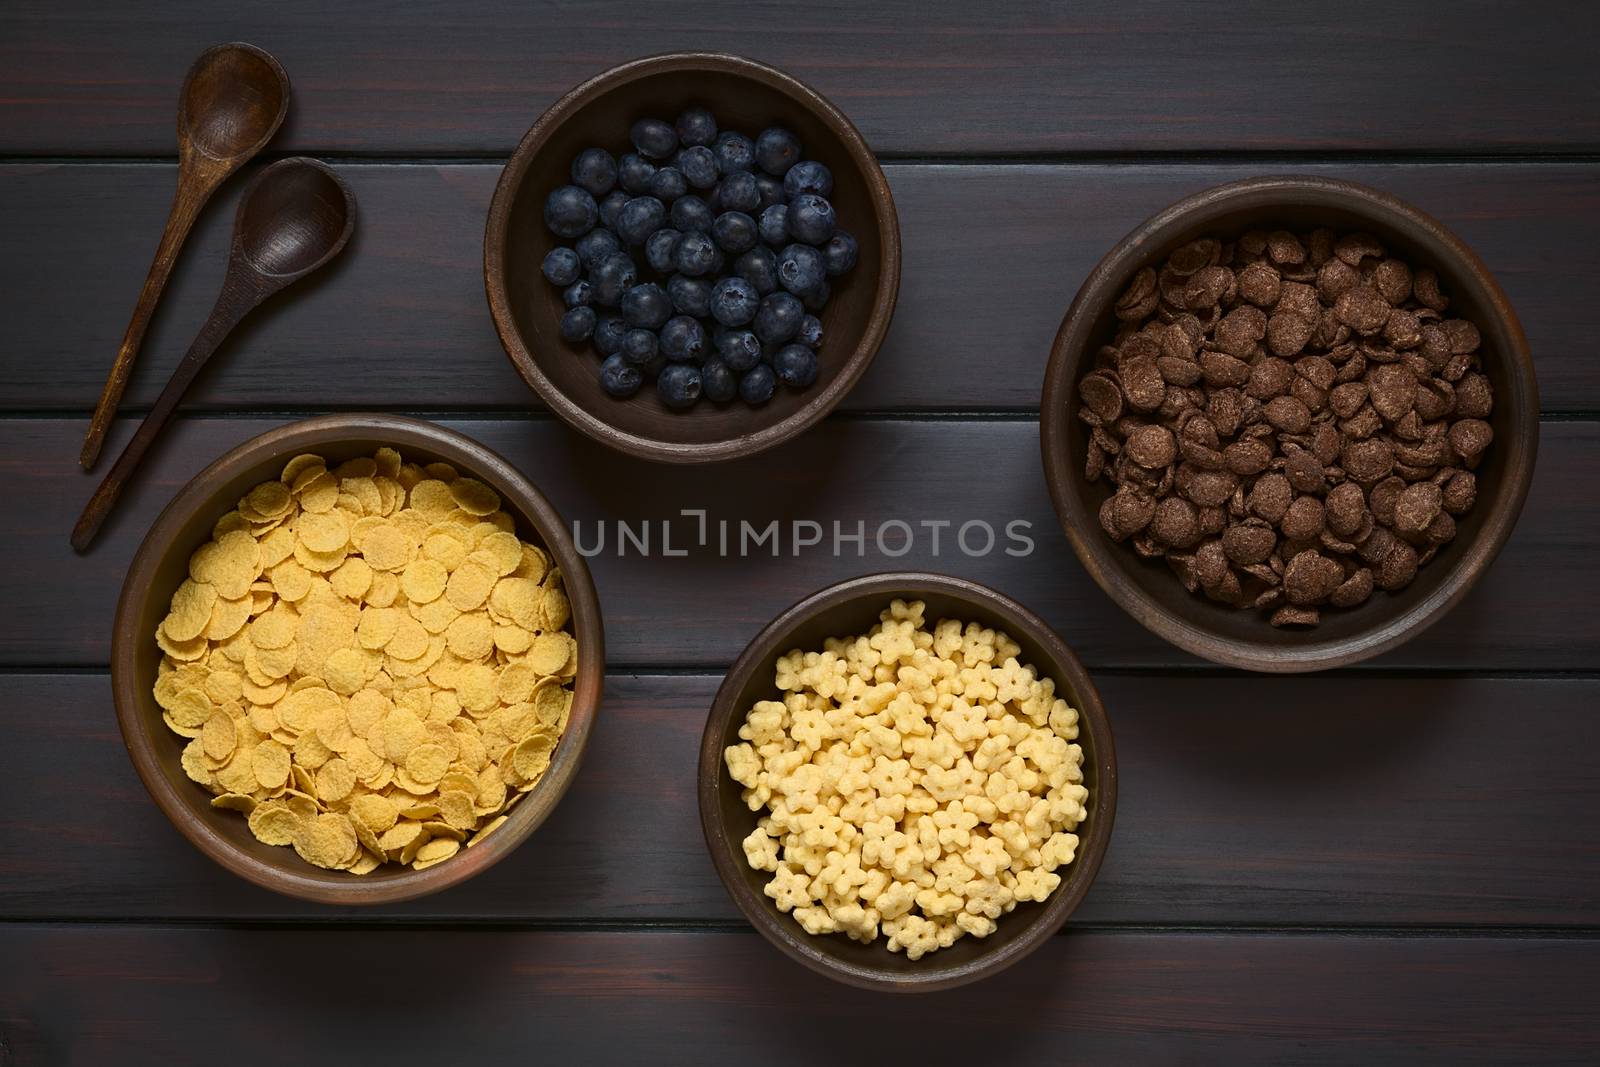 Breakfast Cereals with Blueberries by ildi